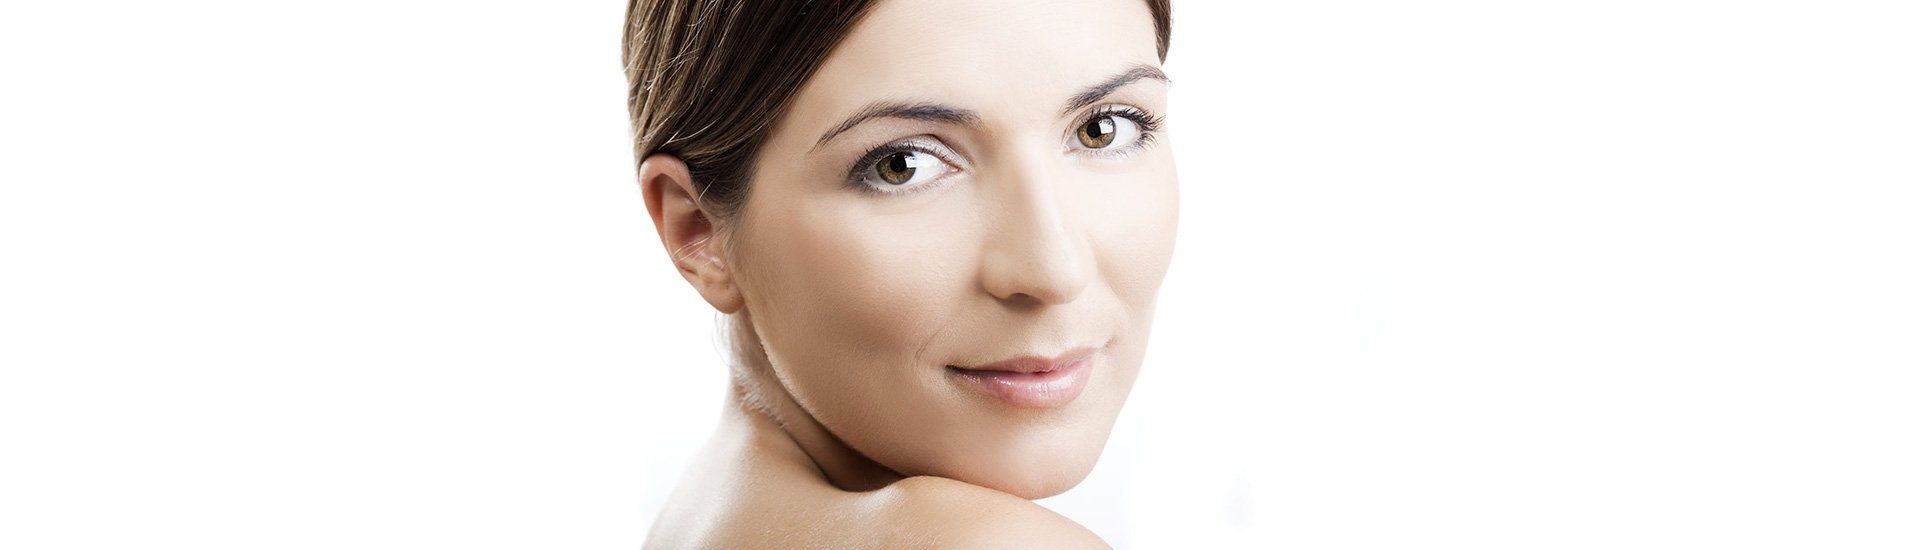 a lady with blemish-free skin